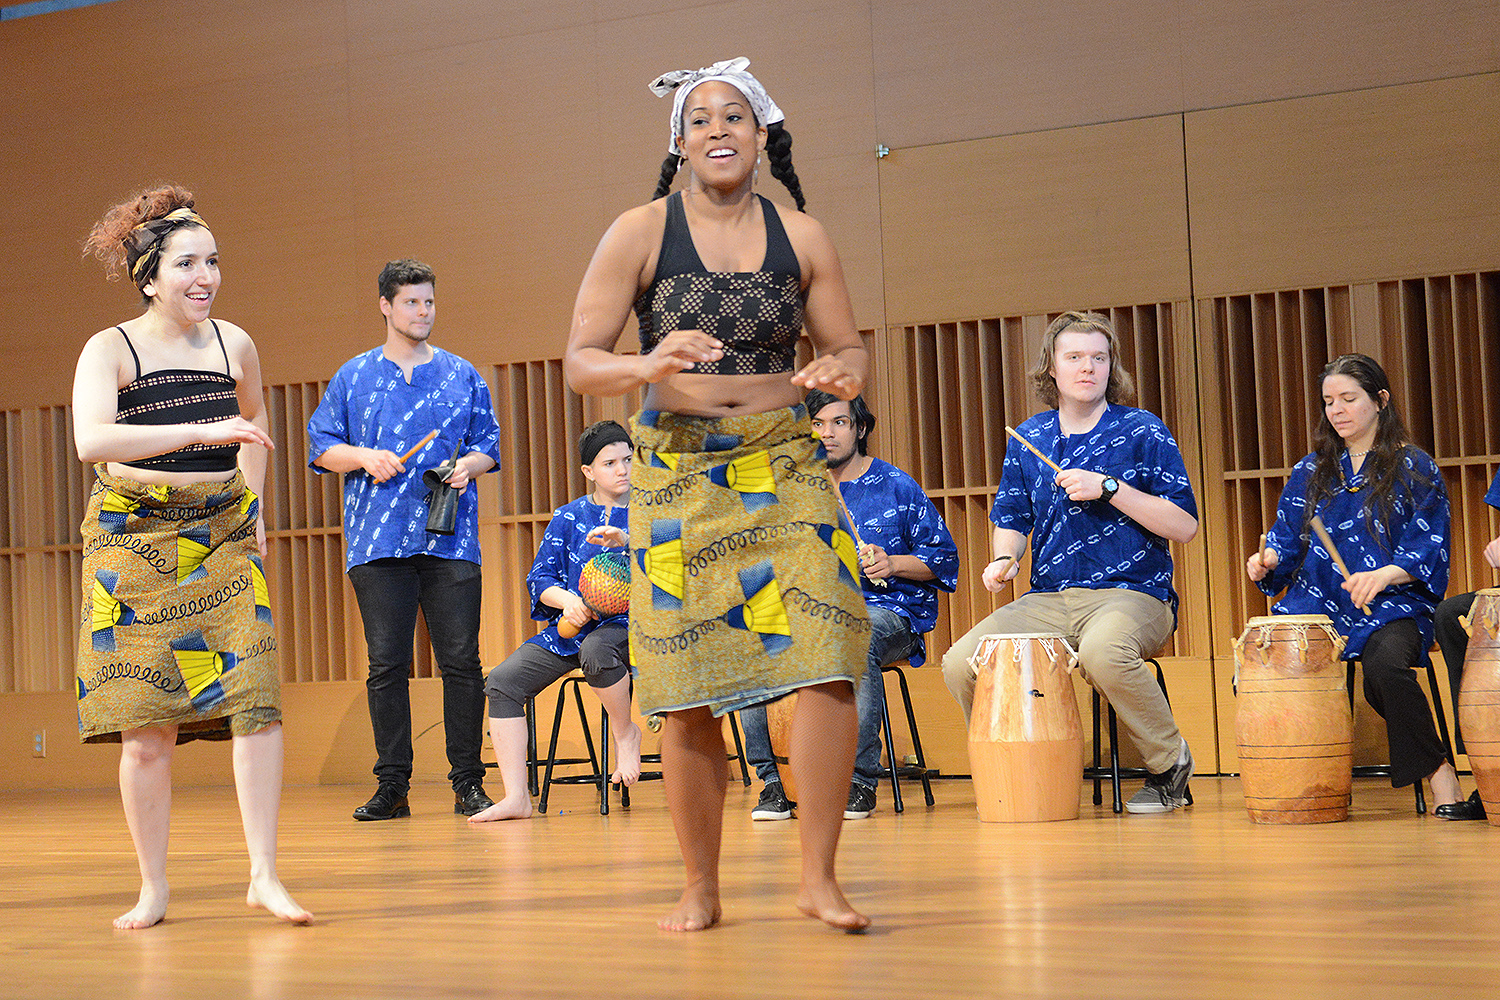 On May 7, Master drummer Abraham Adzenyah, adjunct professor of music, emeritus, returned to campus for a ceremony, farewell concerts, and reunion featuring past and present students. Adzenyah taught West African music, dance and culture at Wesleyan for 46 years and retired in May.